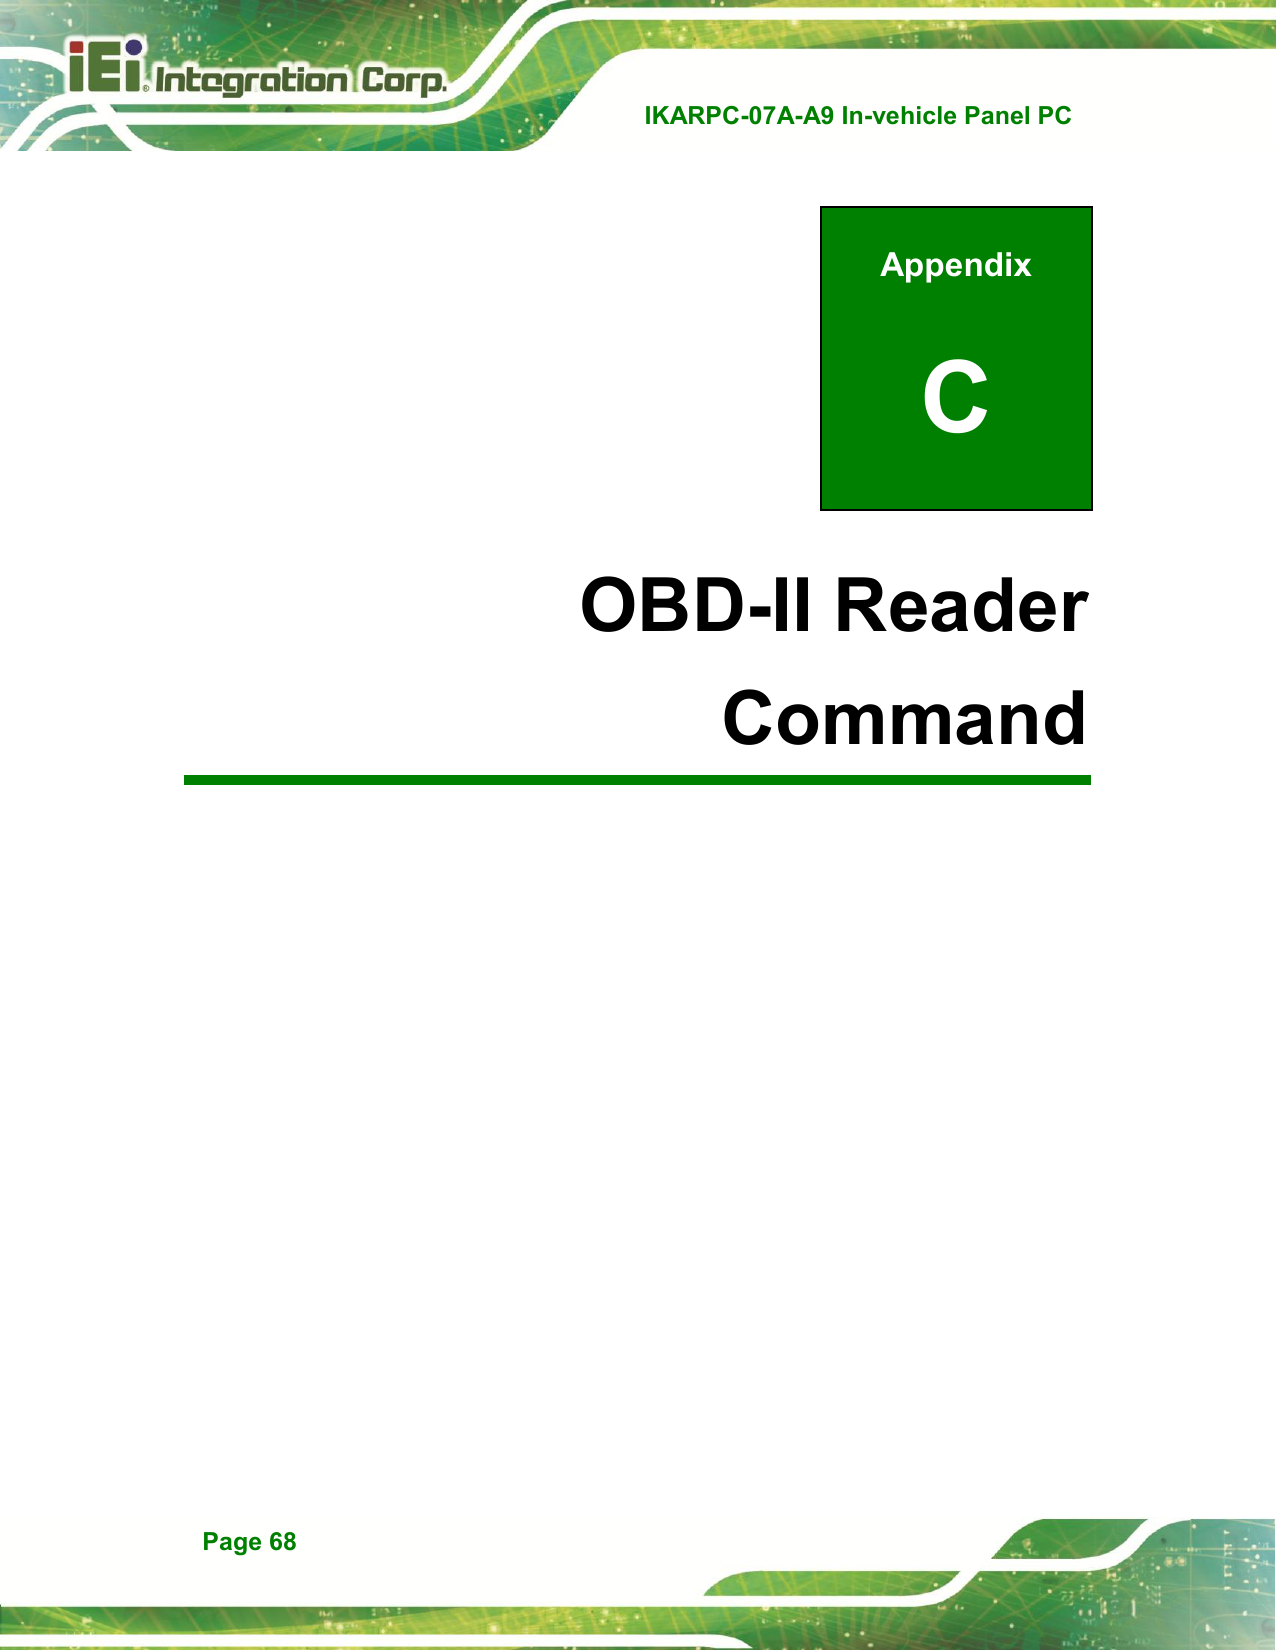   IKARPC-07A-A9 In-vehicle Panel PC  Page 68 Appendix C C OBD-II Reader Command 